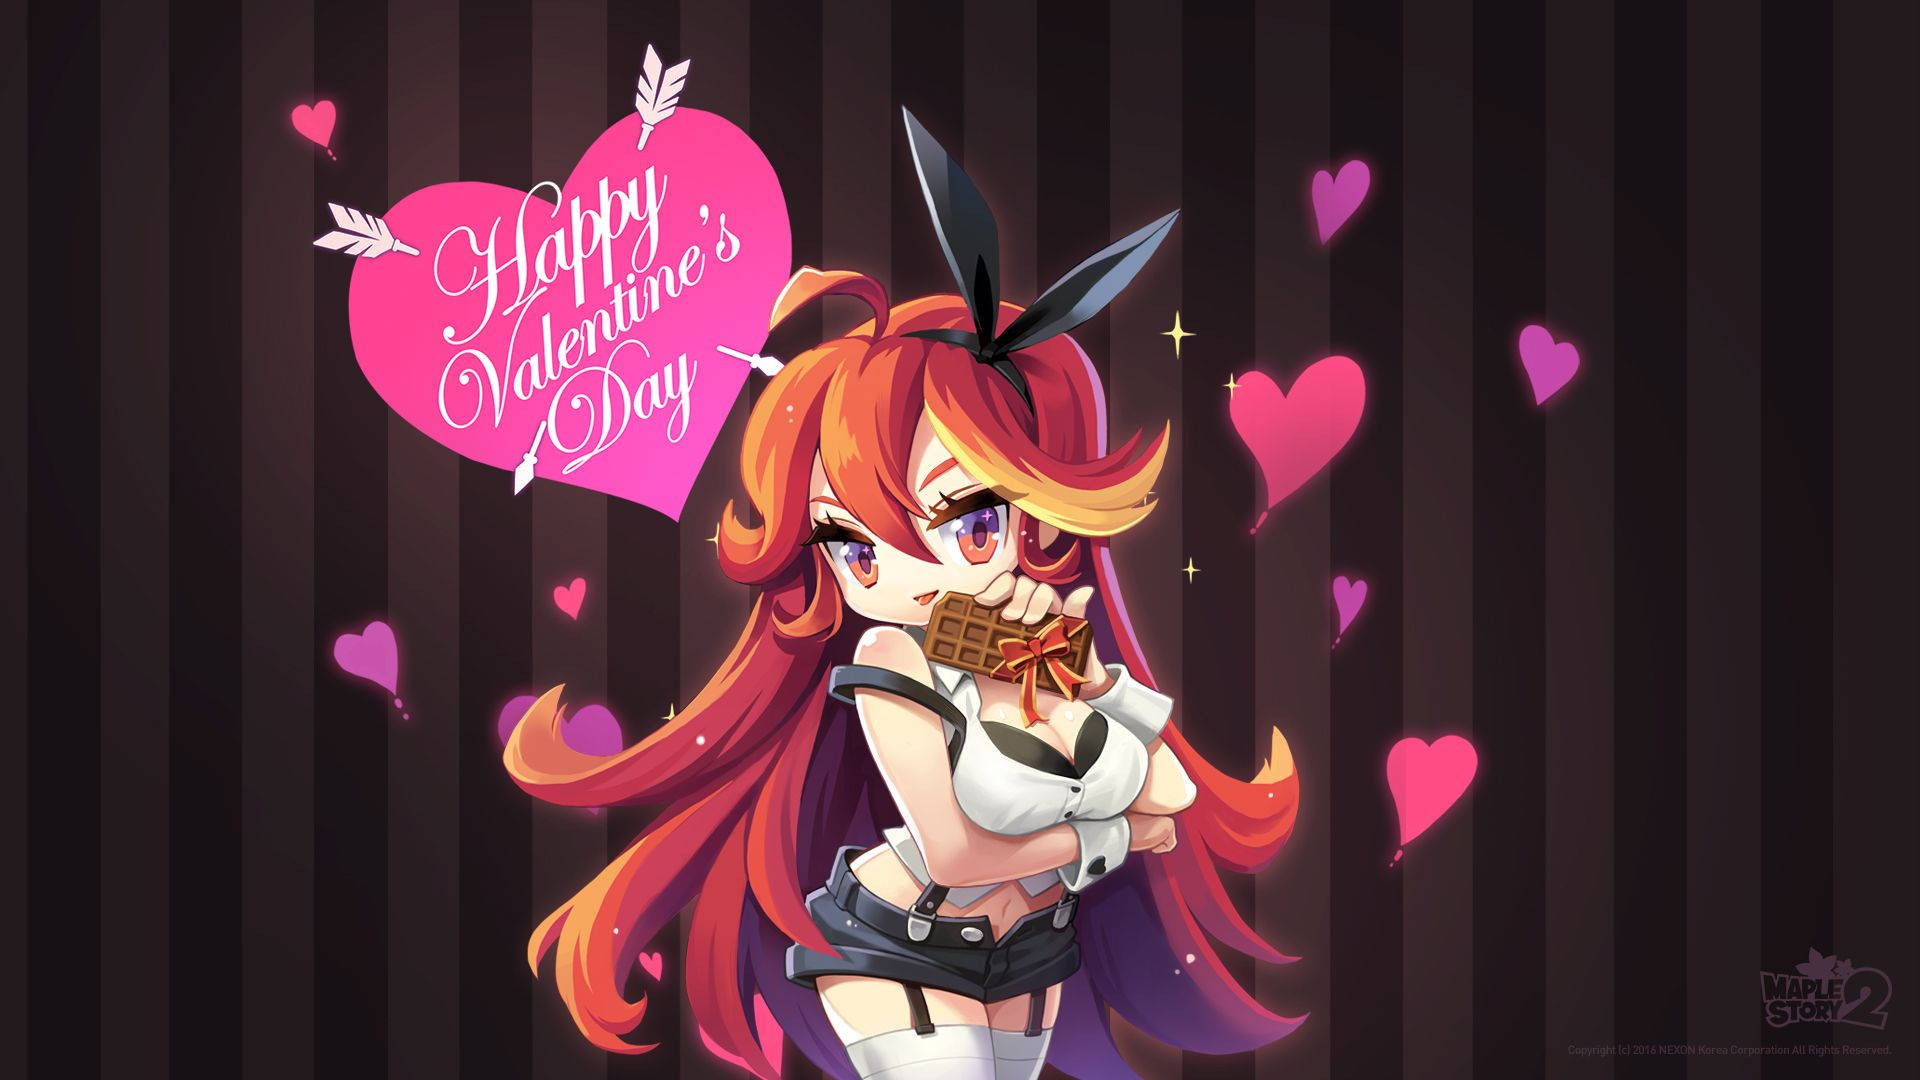 A Girl With Red Hair And A Heart Shaped Cake Wallpaper